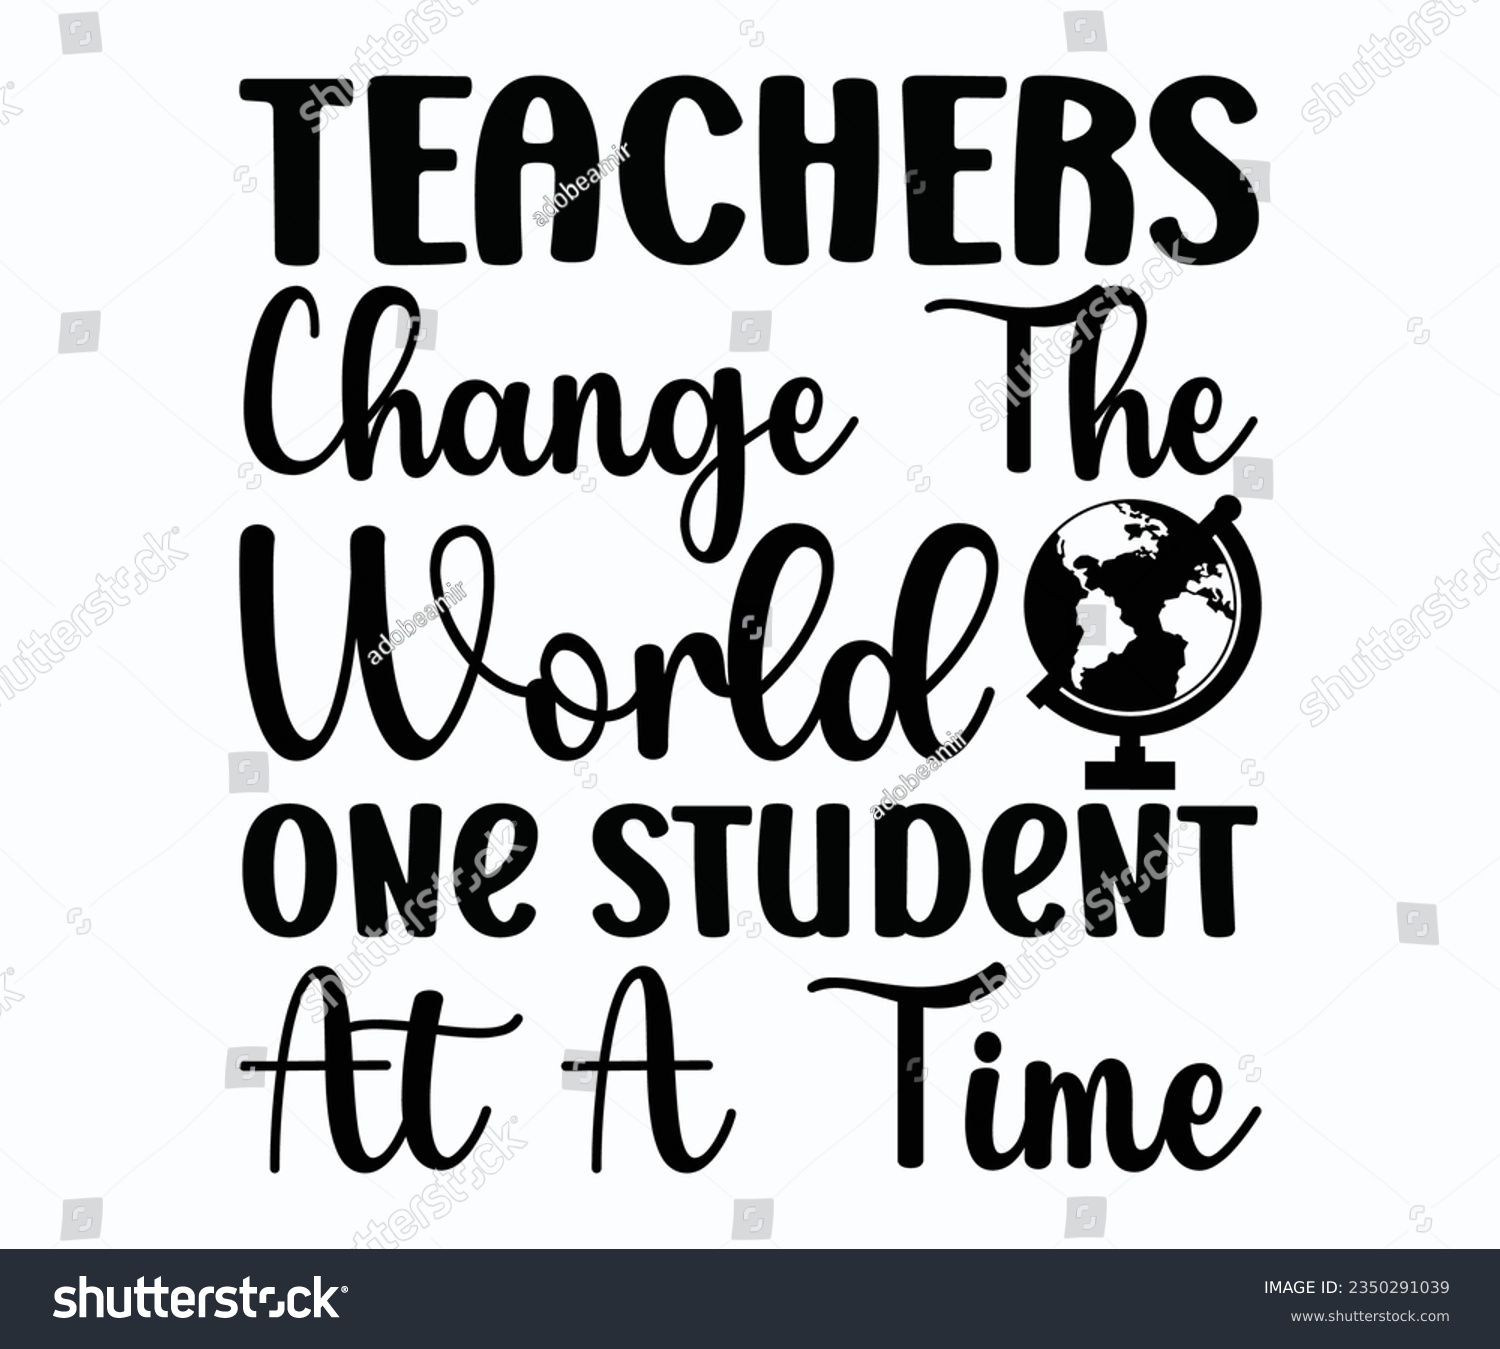 SVG of Teachers Change The World One Student At A Time T-shirt, Teacher SVG, Teacher T-shirt, Teacher Quotes T-shirt, Back To School, Hello School Shirt, School Shirt for Kids, Kindergarten School svg svg